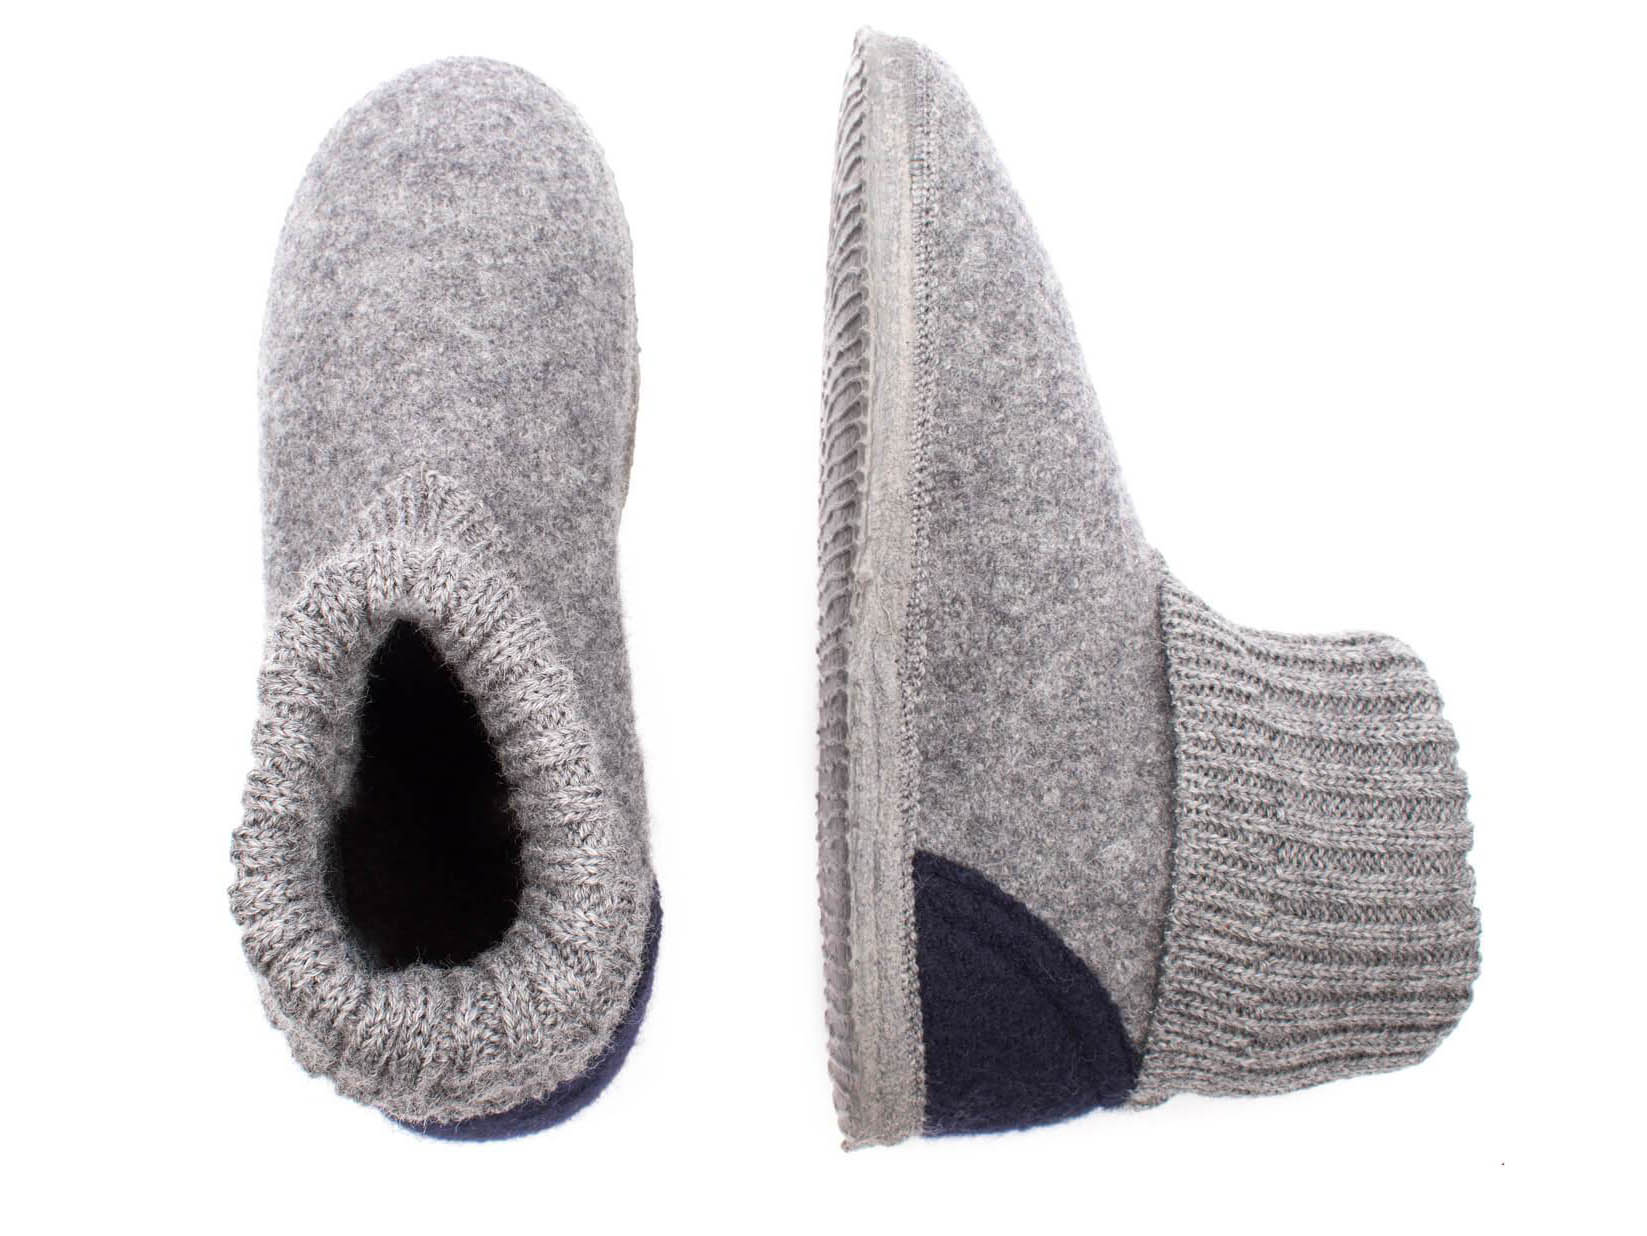 mens slippers that cover ankles